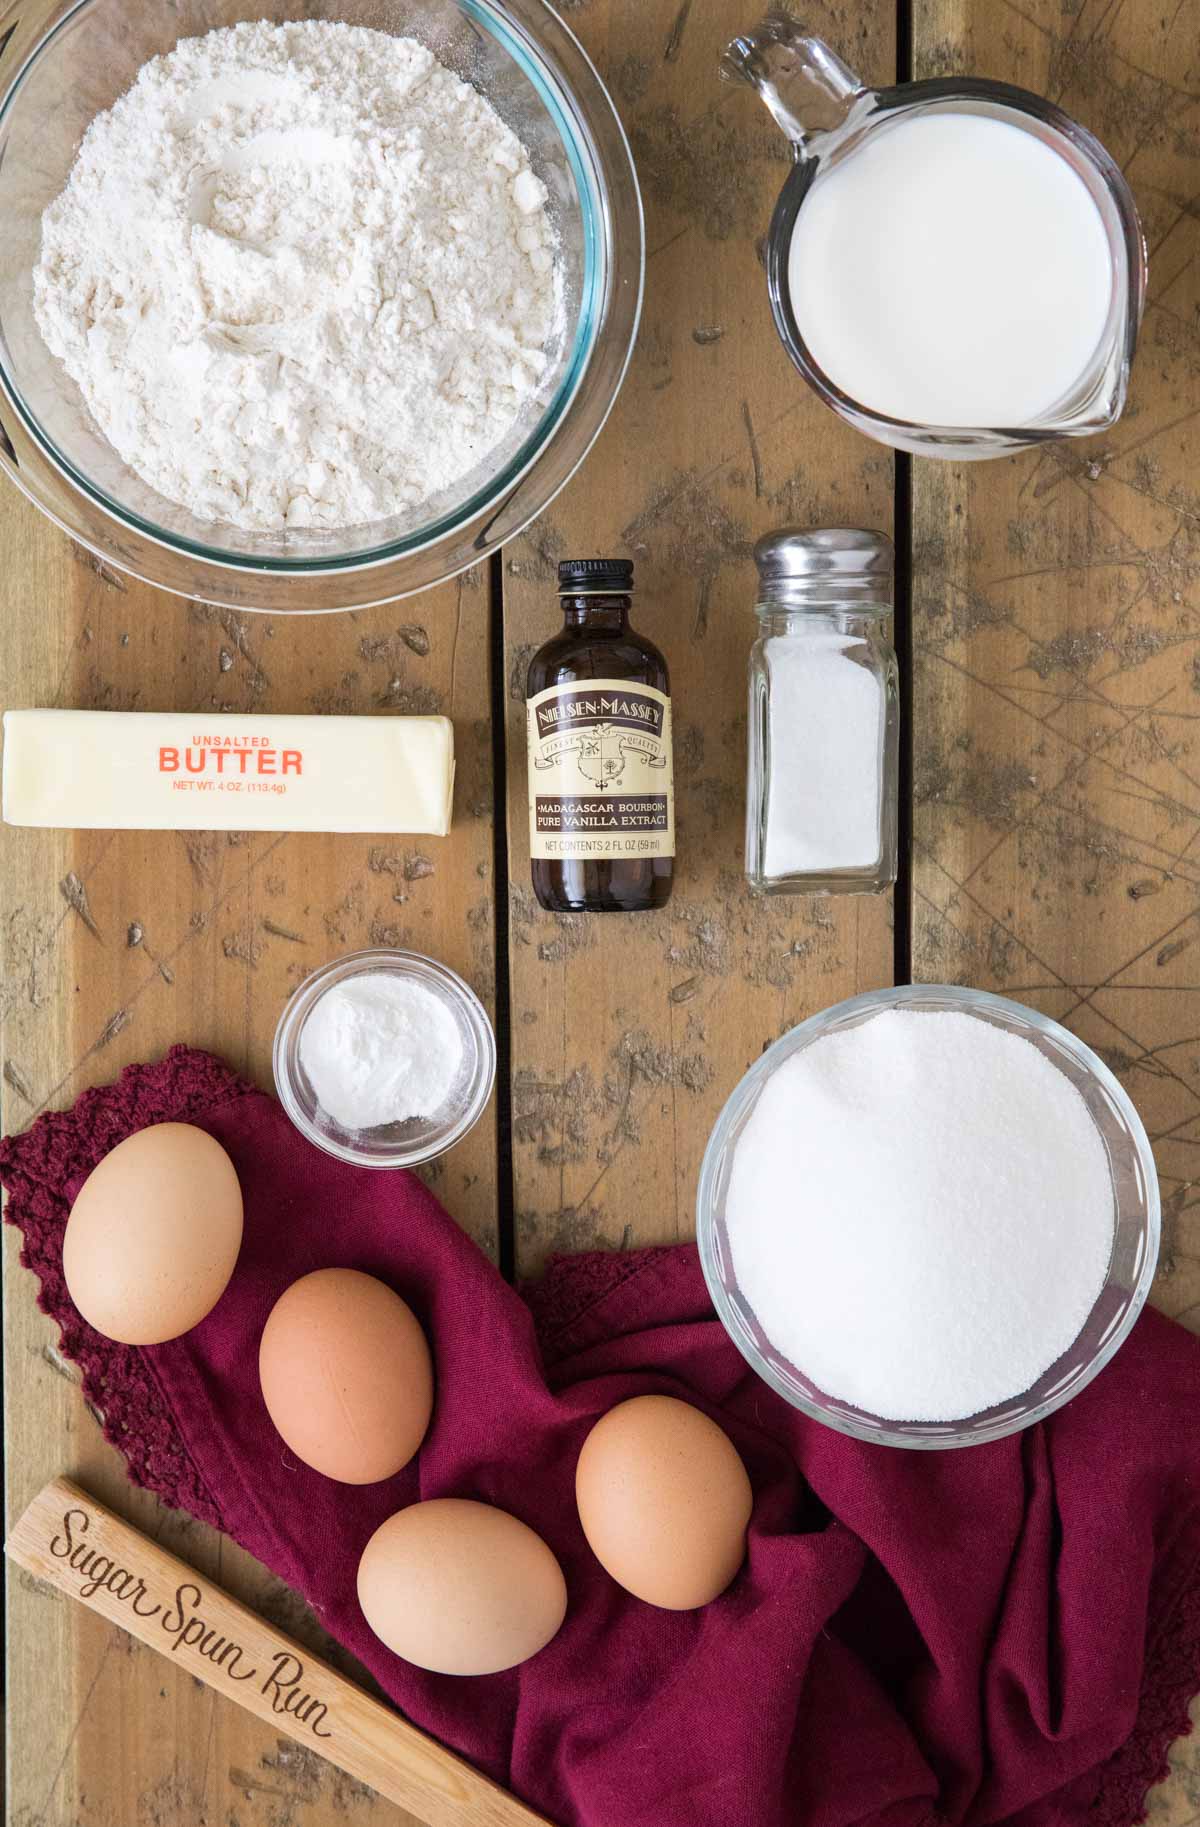 overhead view of ingredients including eggs, flour, butter, sugar, and more